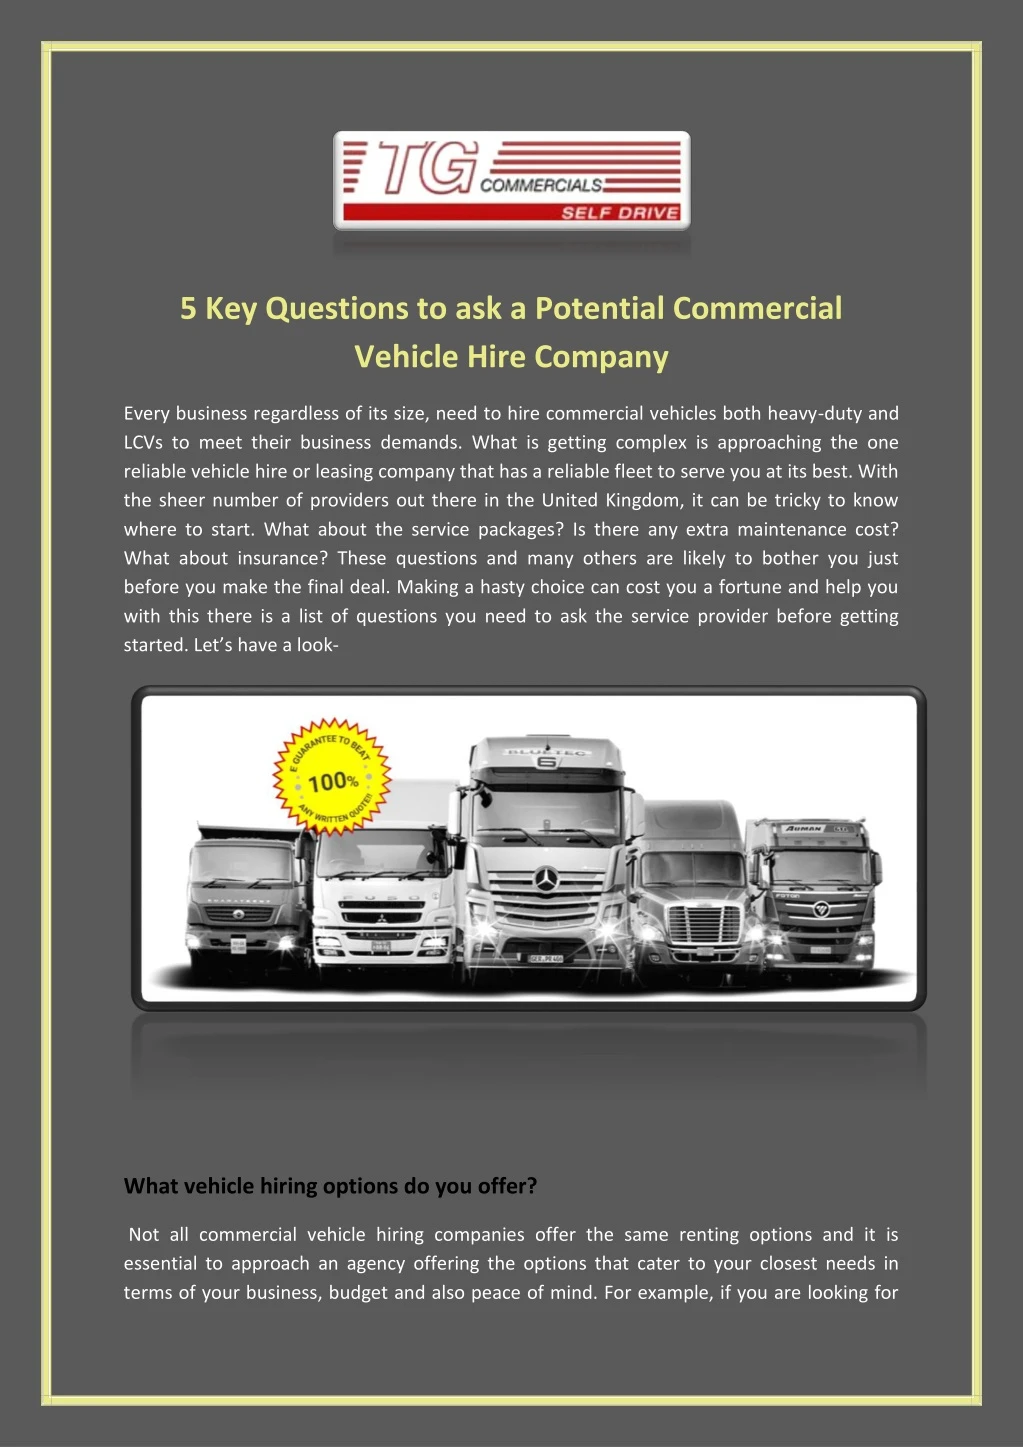 5 key questions to ask a potential commercial